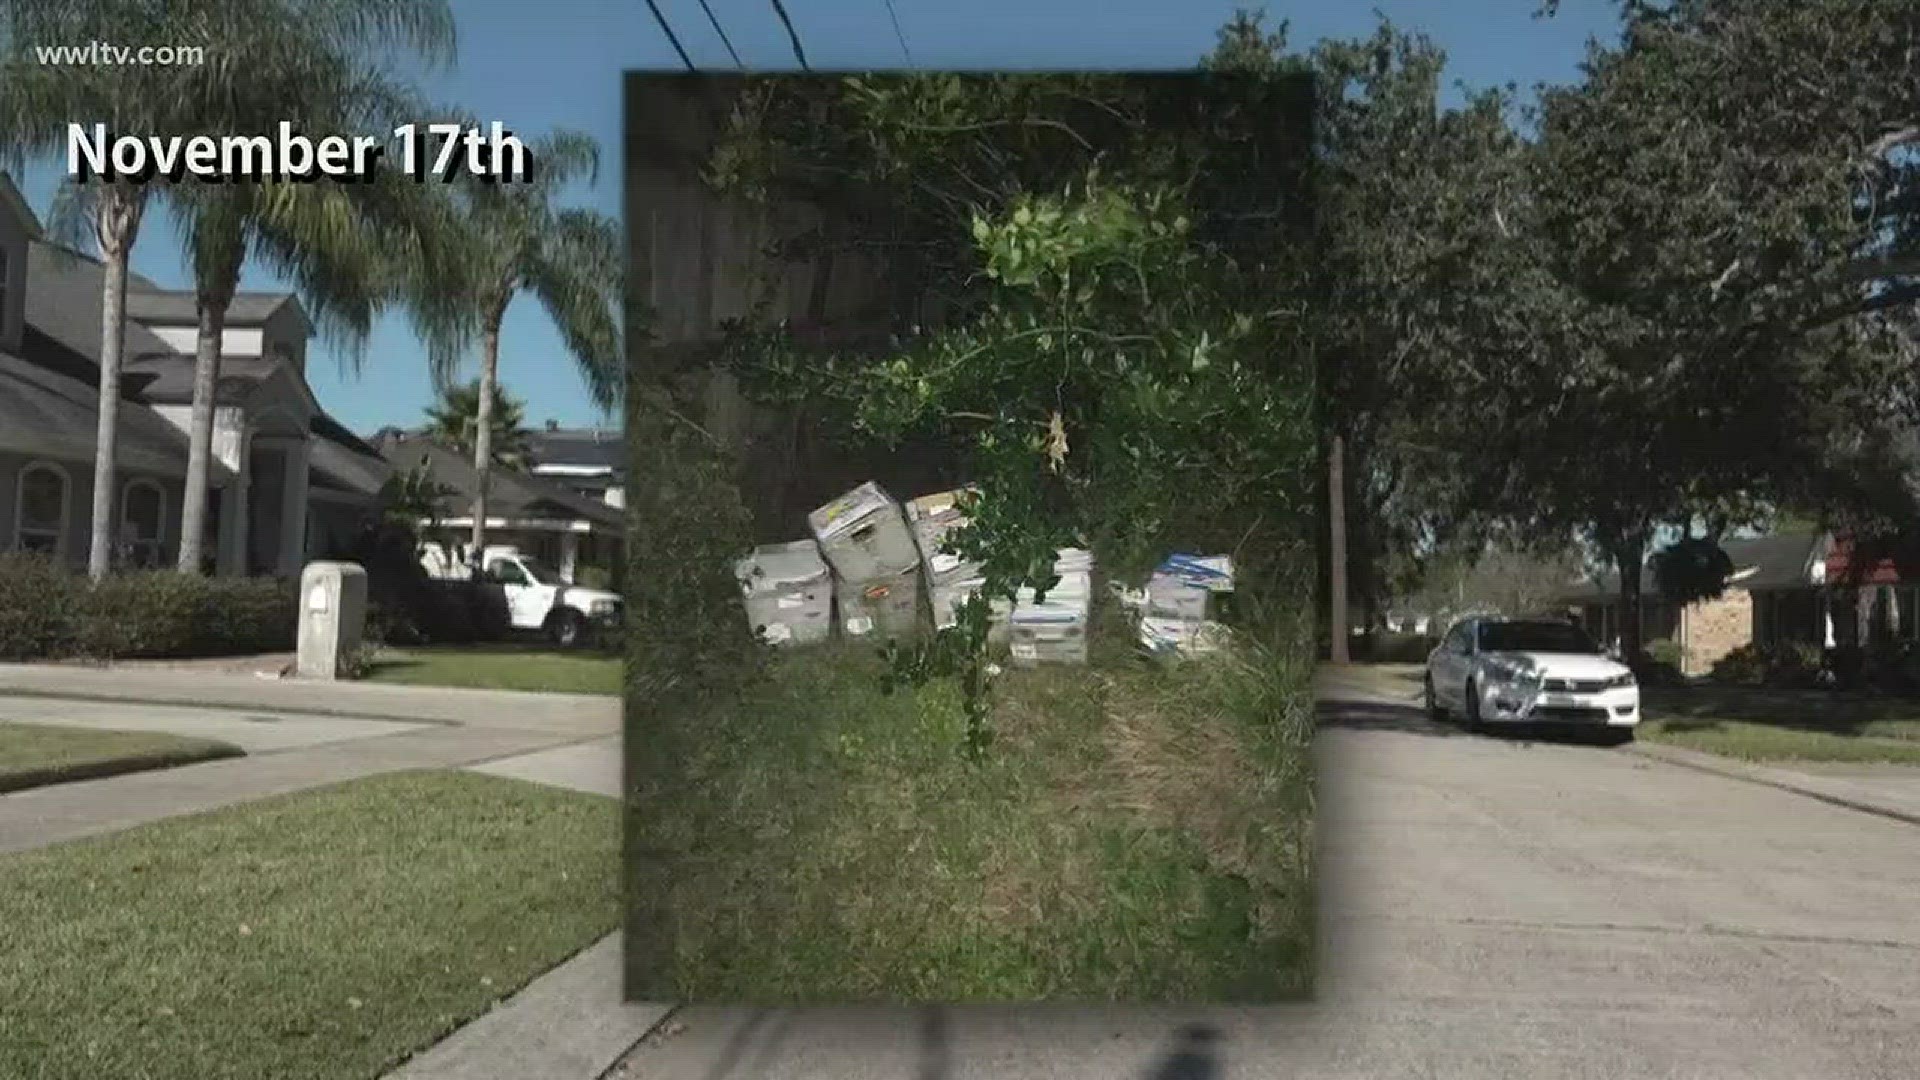 Residents say whether you live in Harahan, Jefferson or River Ridge you'll probably experience problems with your mail, all stemming from the Elmwood branch.